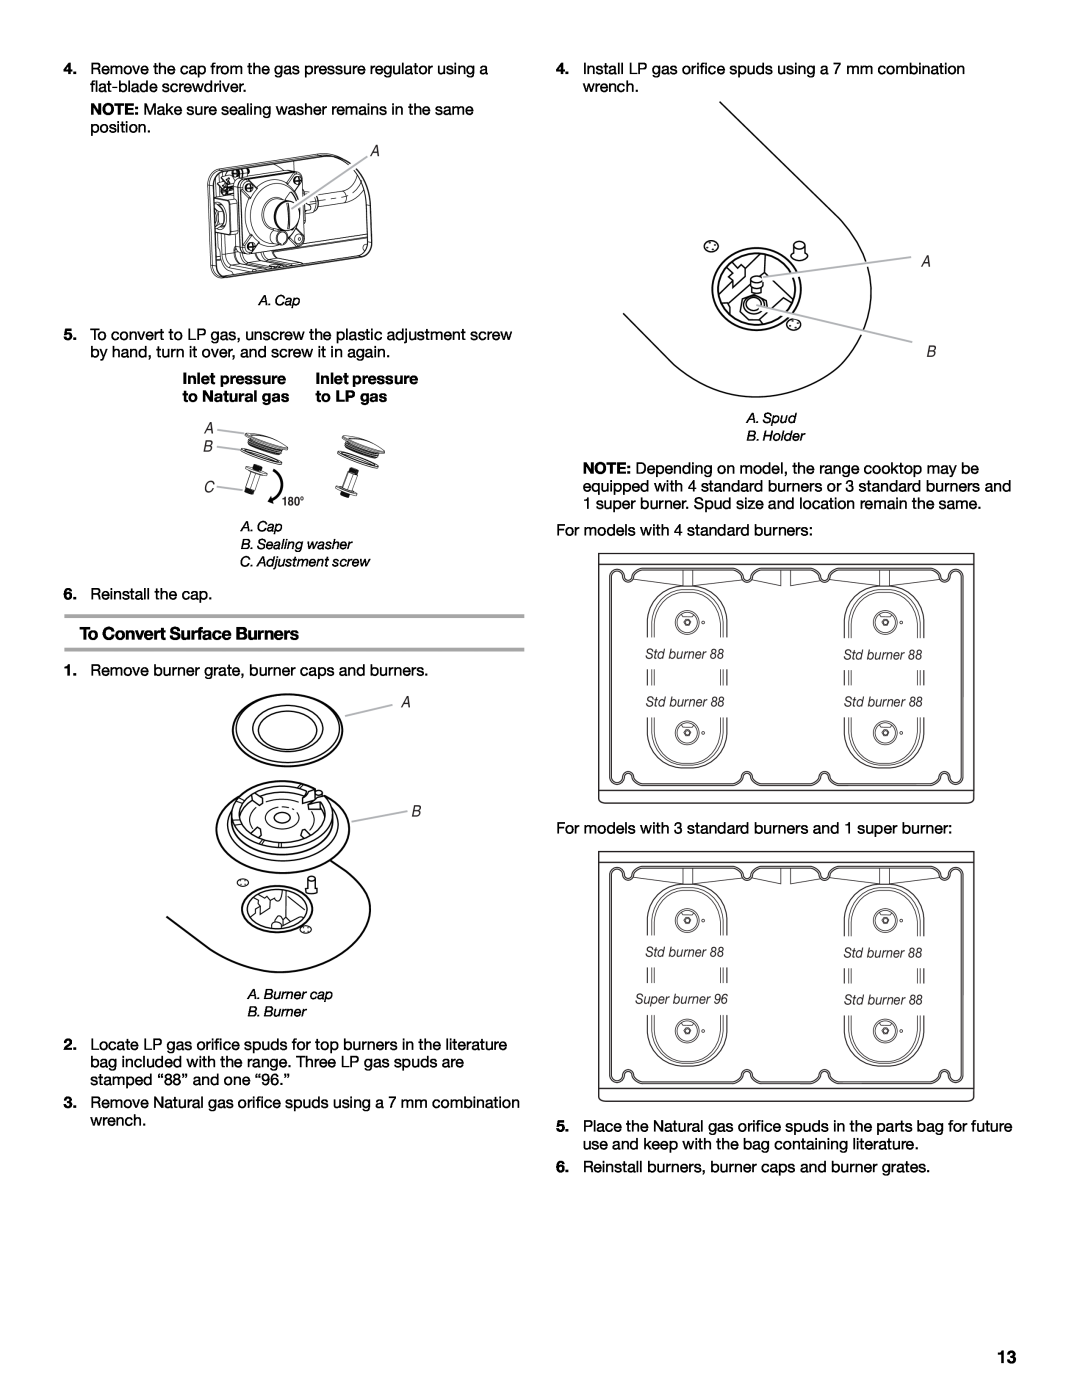 Whirlpool W10477533B installation instructions To Convert Surface Burners, Inlet pressure, to Natural gas, to LP gas, A B C 